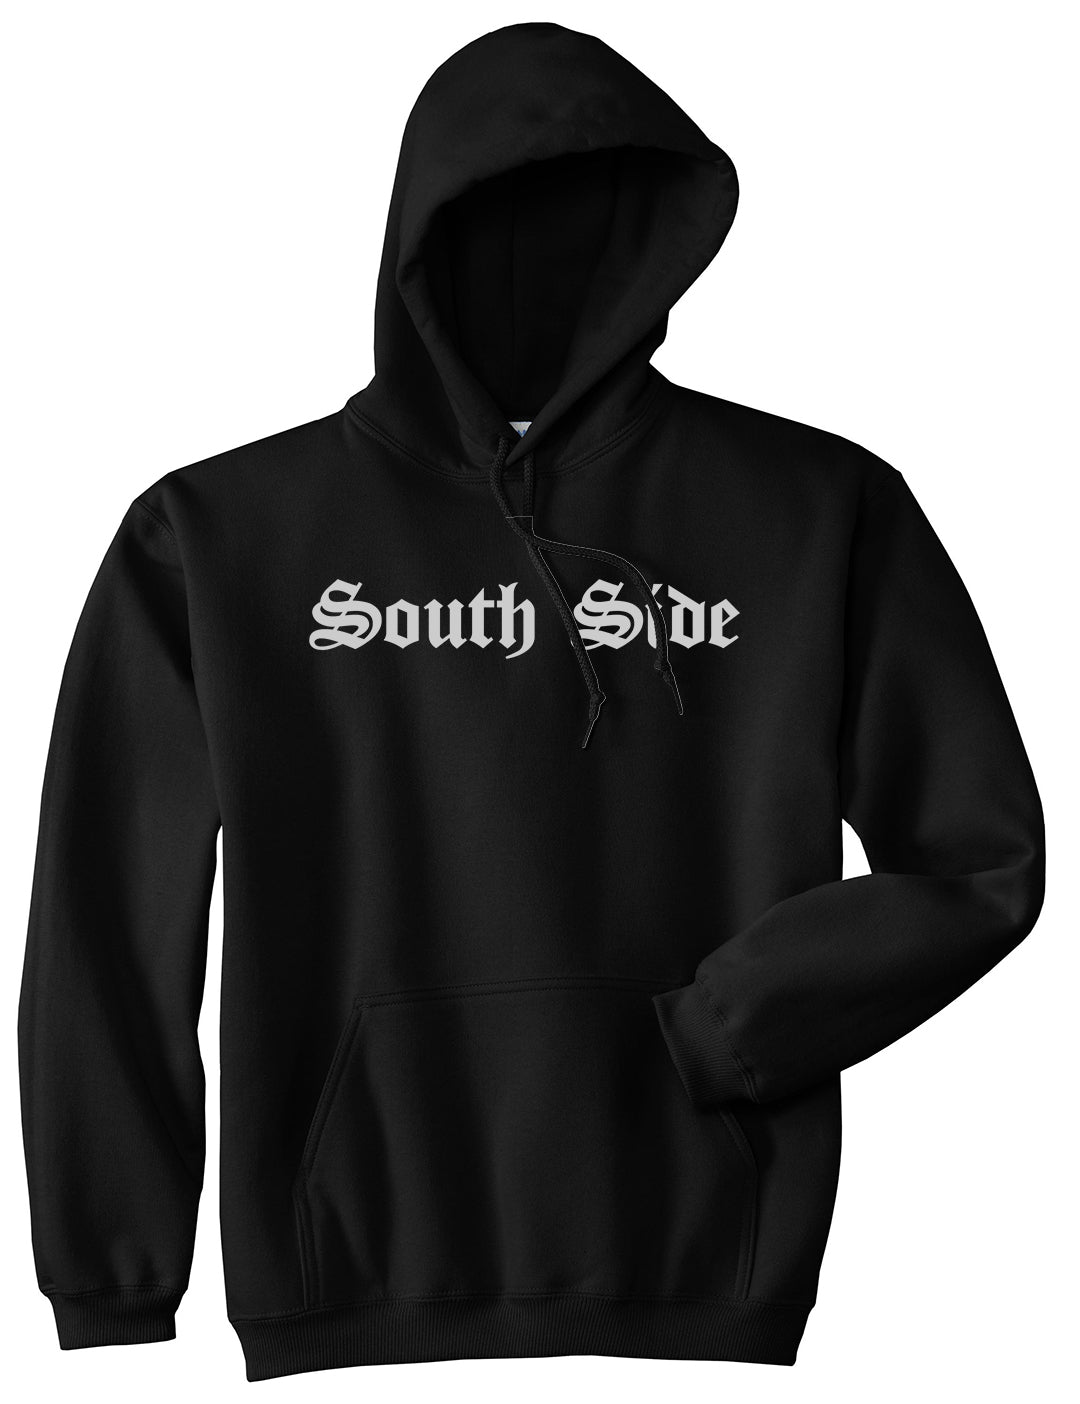 South Side Old English Mens Pullover Hoodie Black